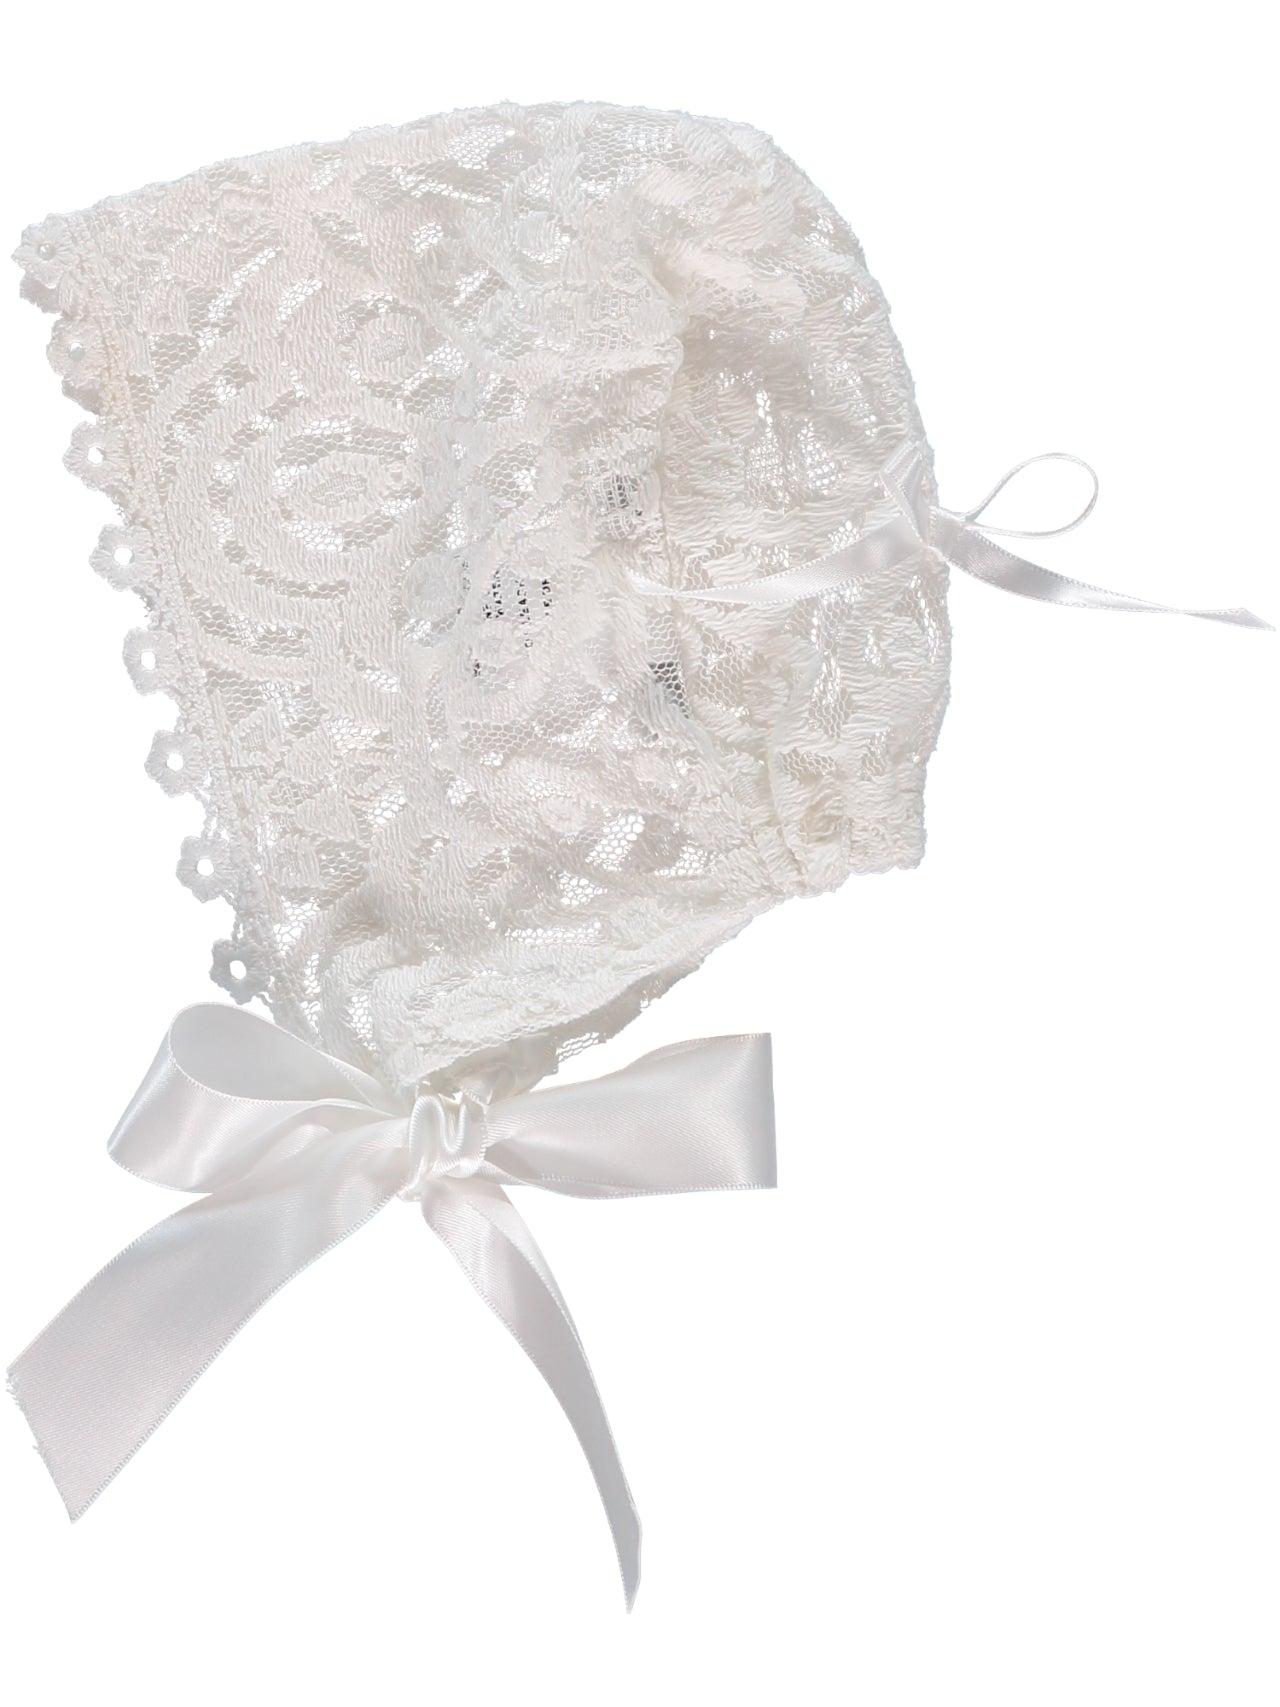 Wholesale Baby Girl Christening Lace Dress with Matching Bonnet 6 - Imagewear